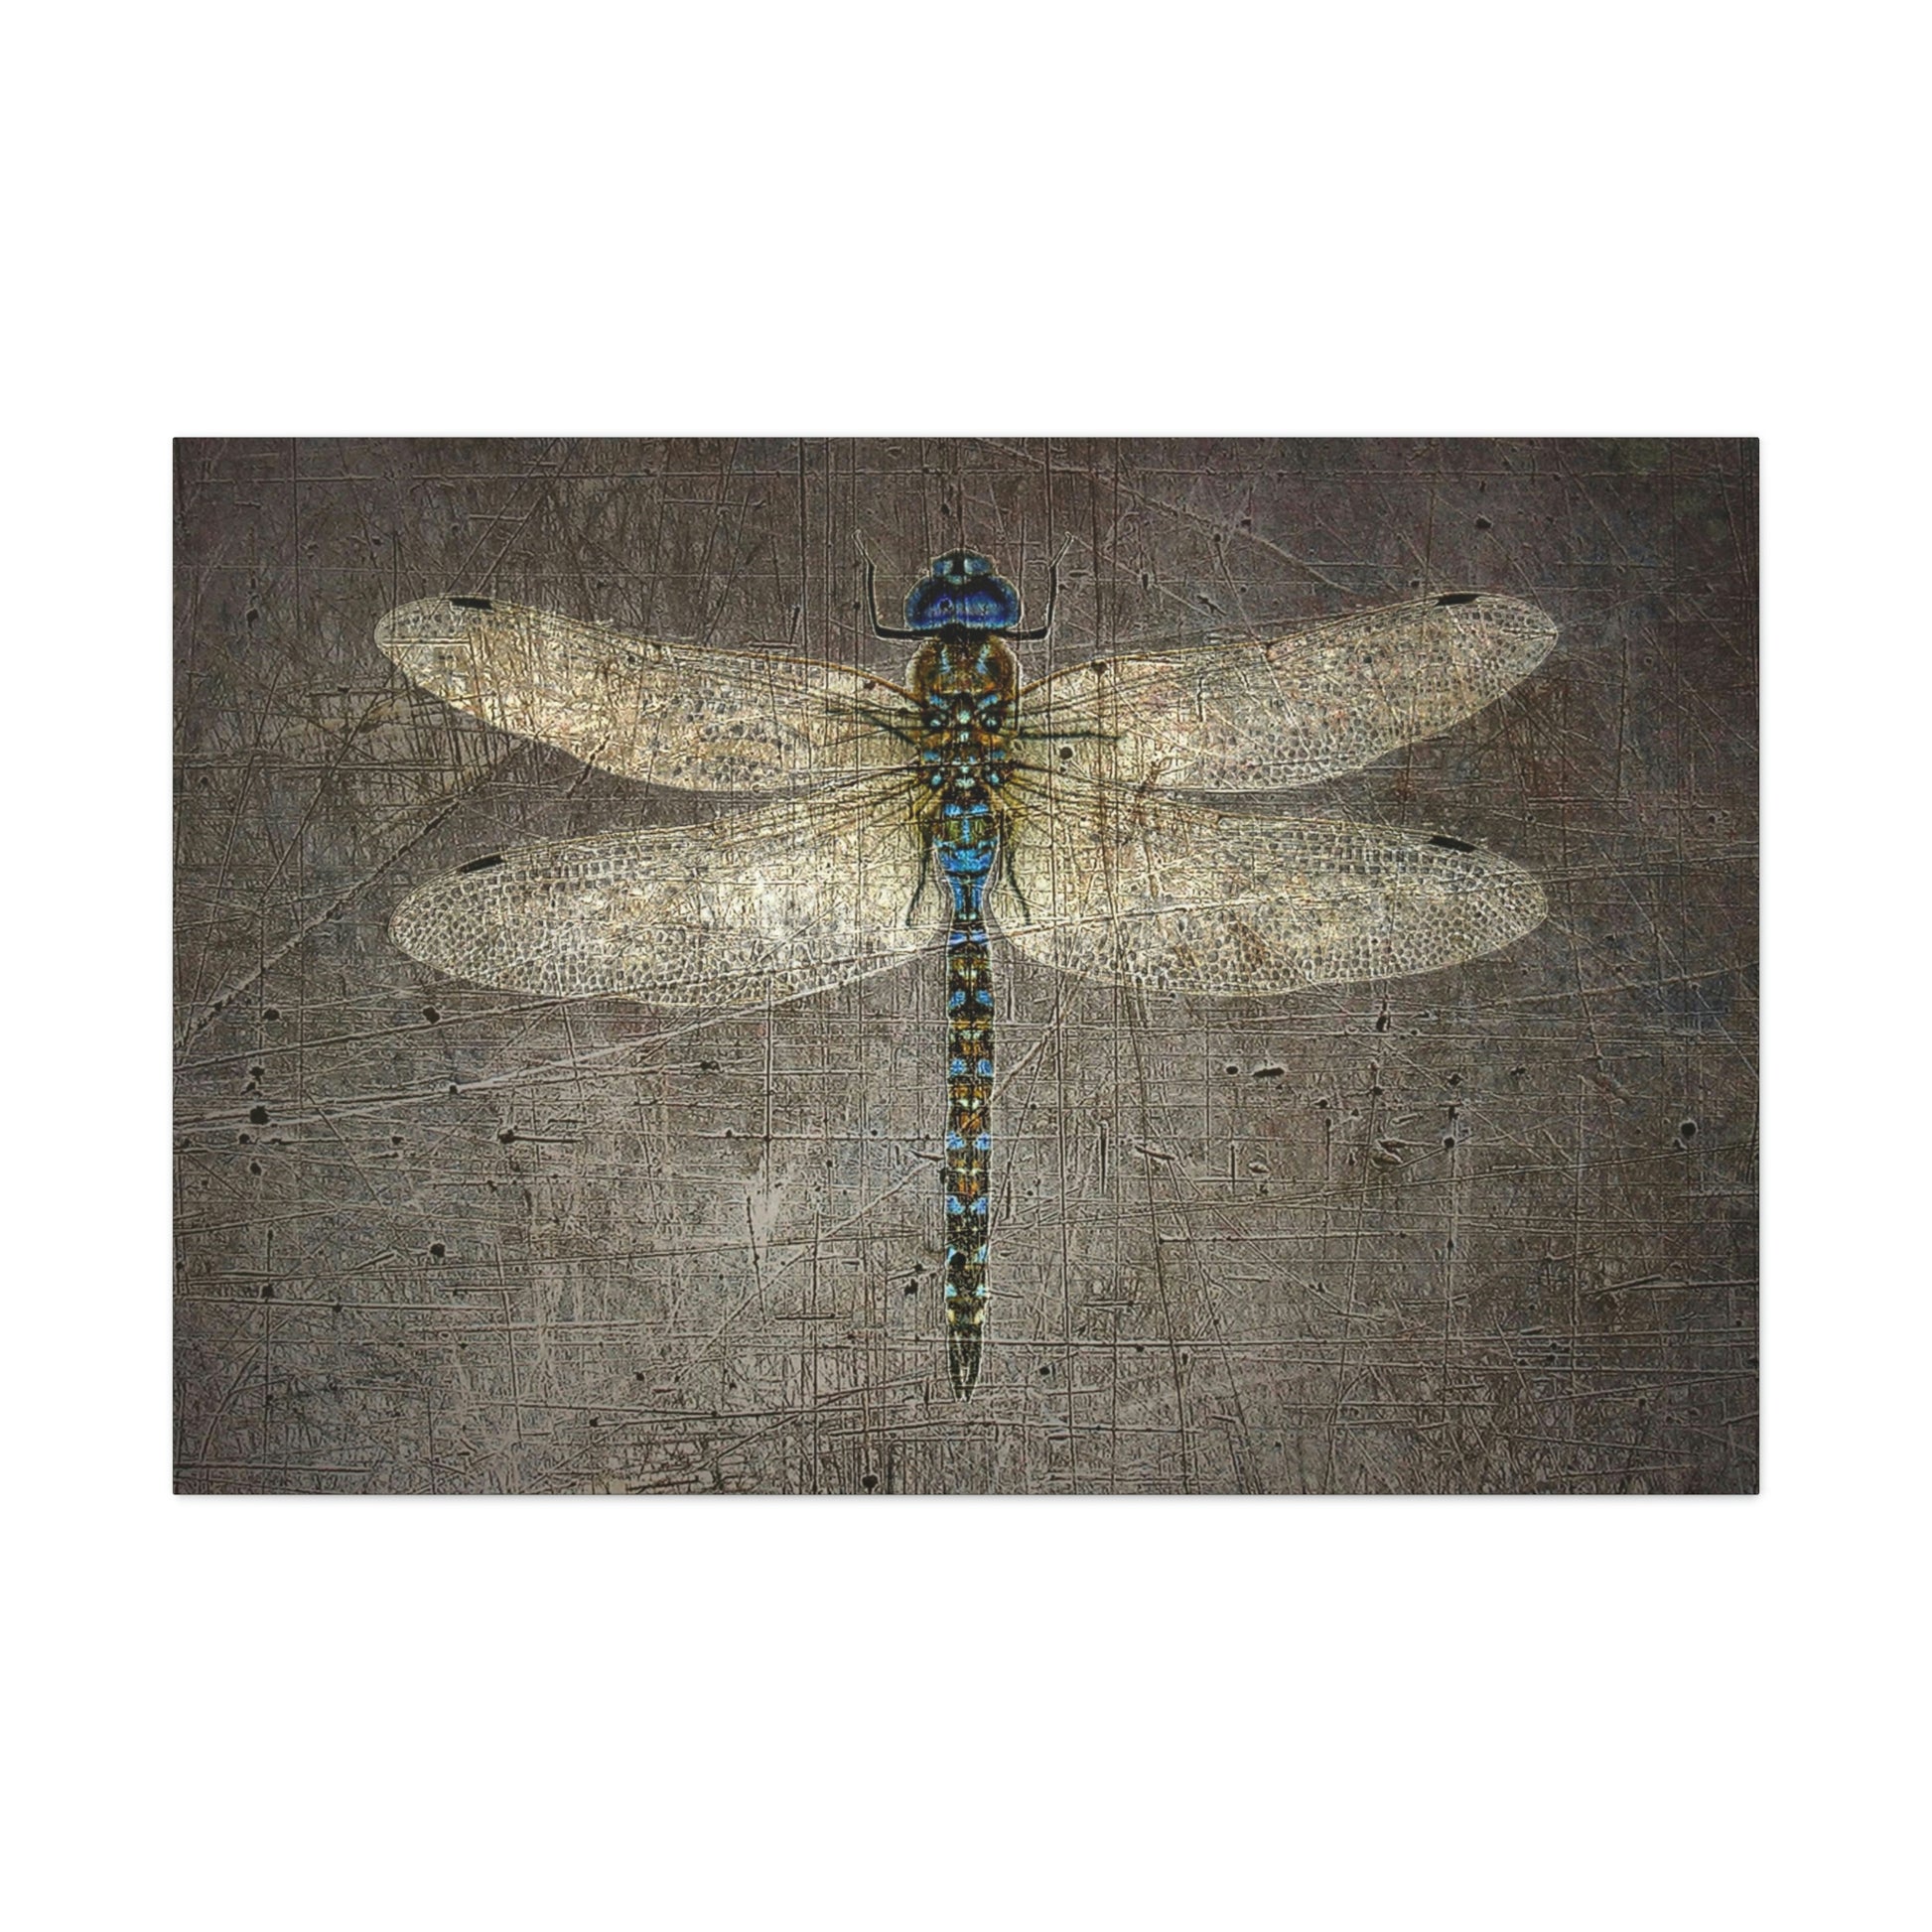 Dragonfly on Distressed Stone Background Rectangular Print on Unframed Stretched Canvas 4 sizes available